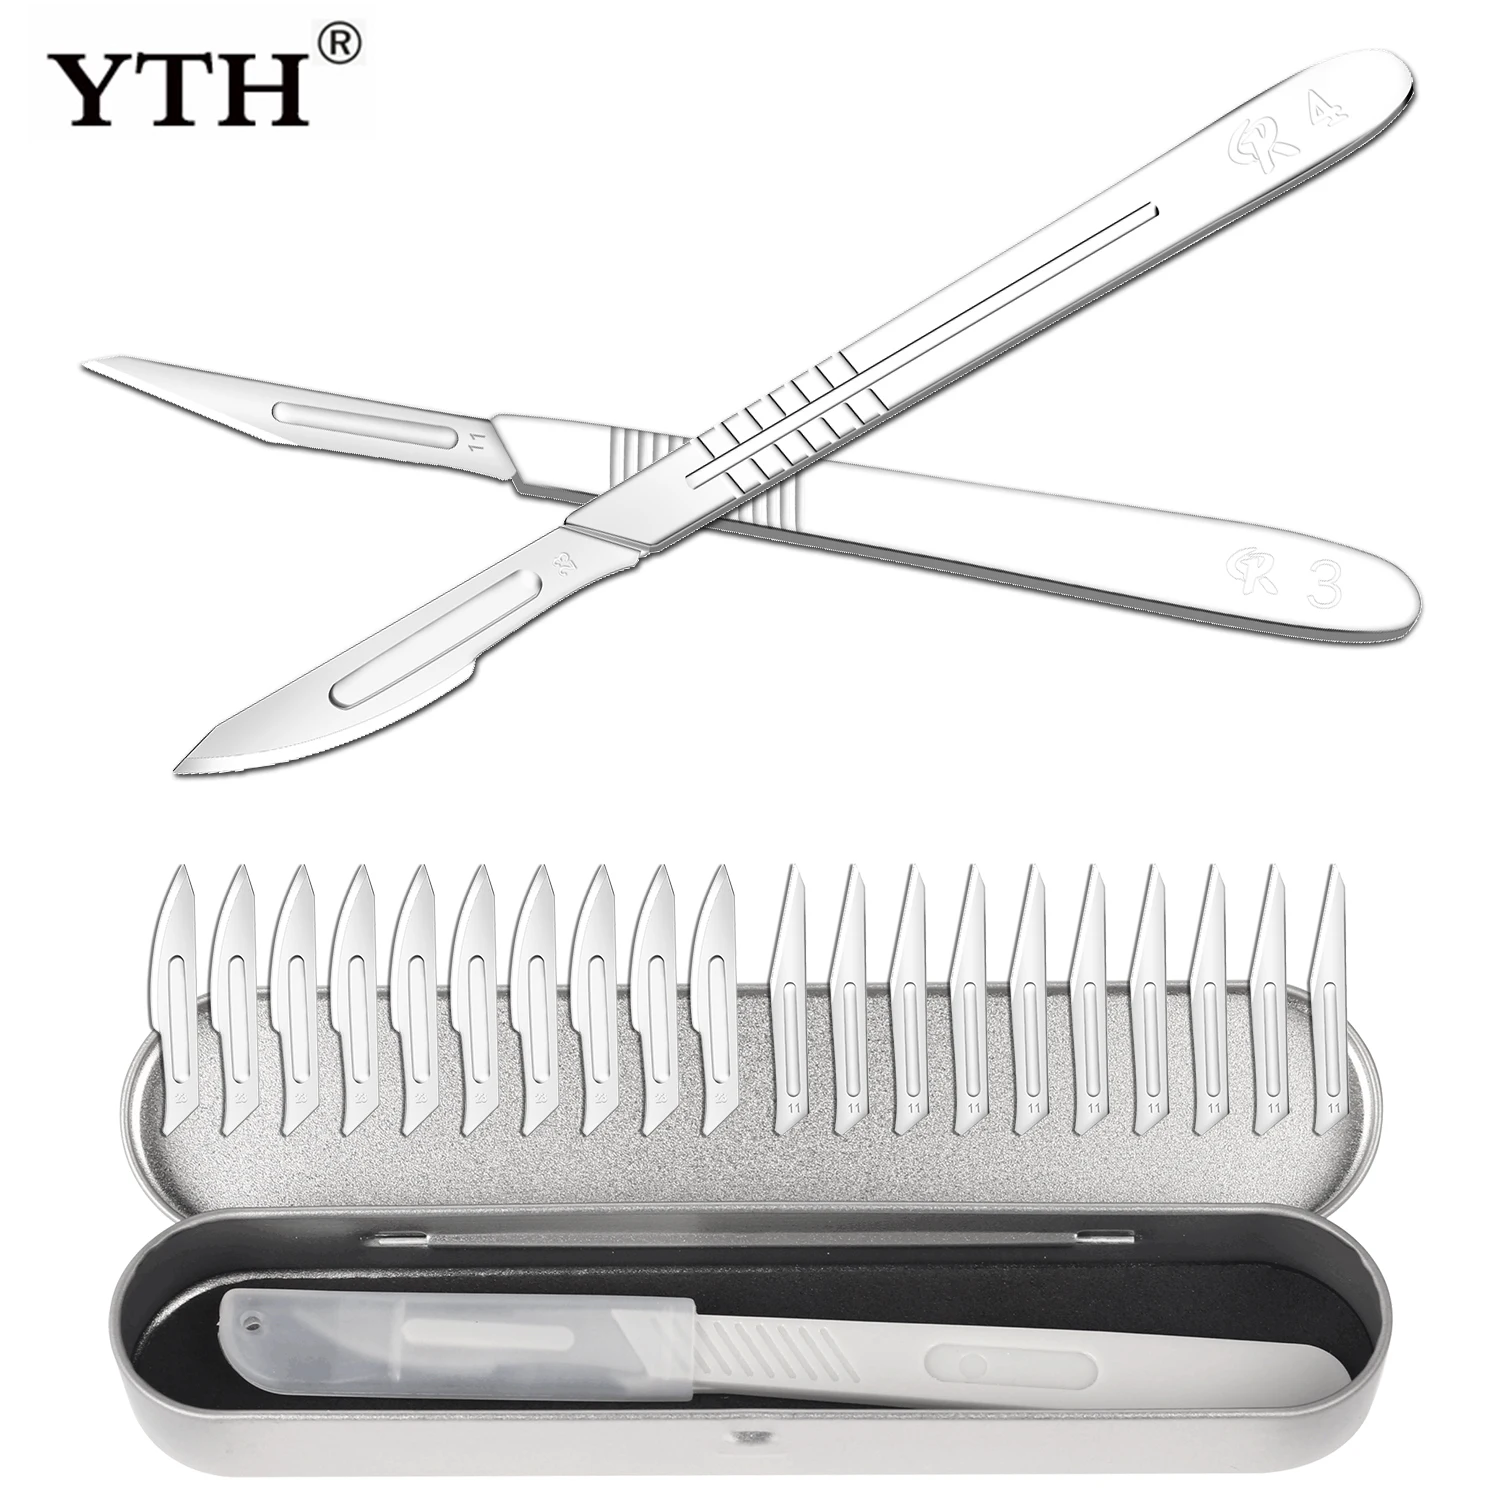 YTH Carbon Steel Blades Surgical Scalpel Blades Replaceable Repair Phone Paper Cut Multifunction Sculpture Carving Knife Scalpel 10 pcs surgical knife blade replacement scalpel with replaceable blades multi function scrapbooking crafts carving knife